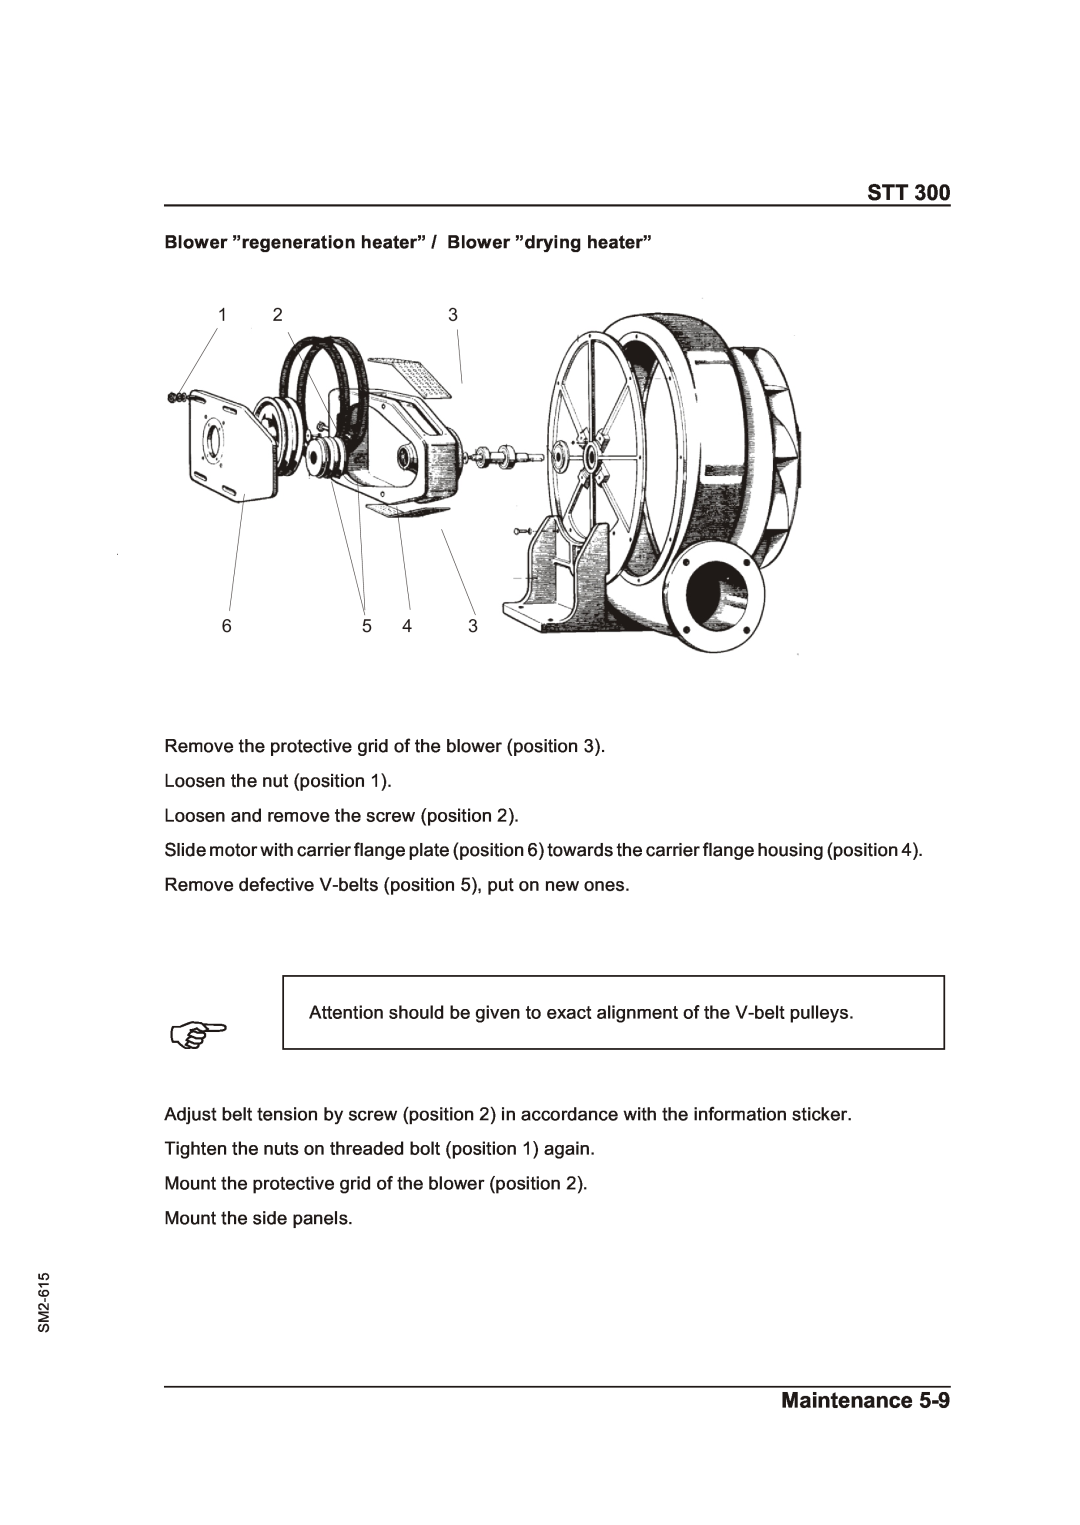 Sterling STT 300 operating instructions Maintenance, Remove the protective grid of the blower position 